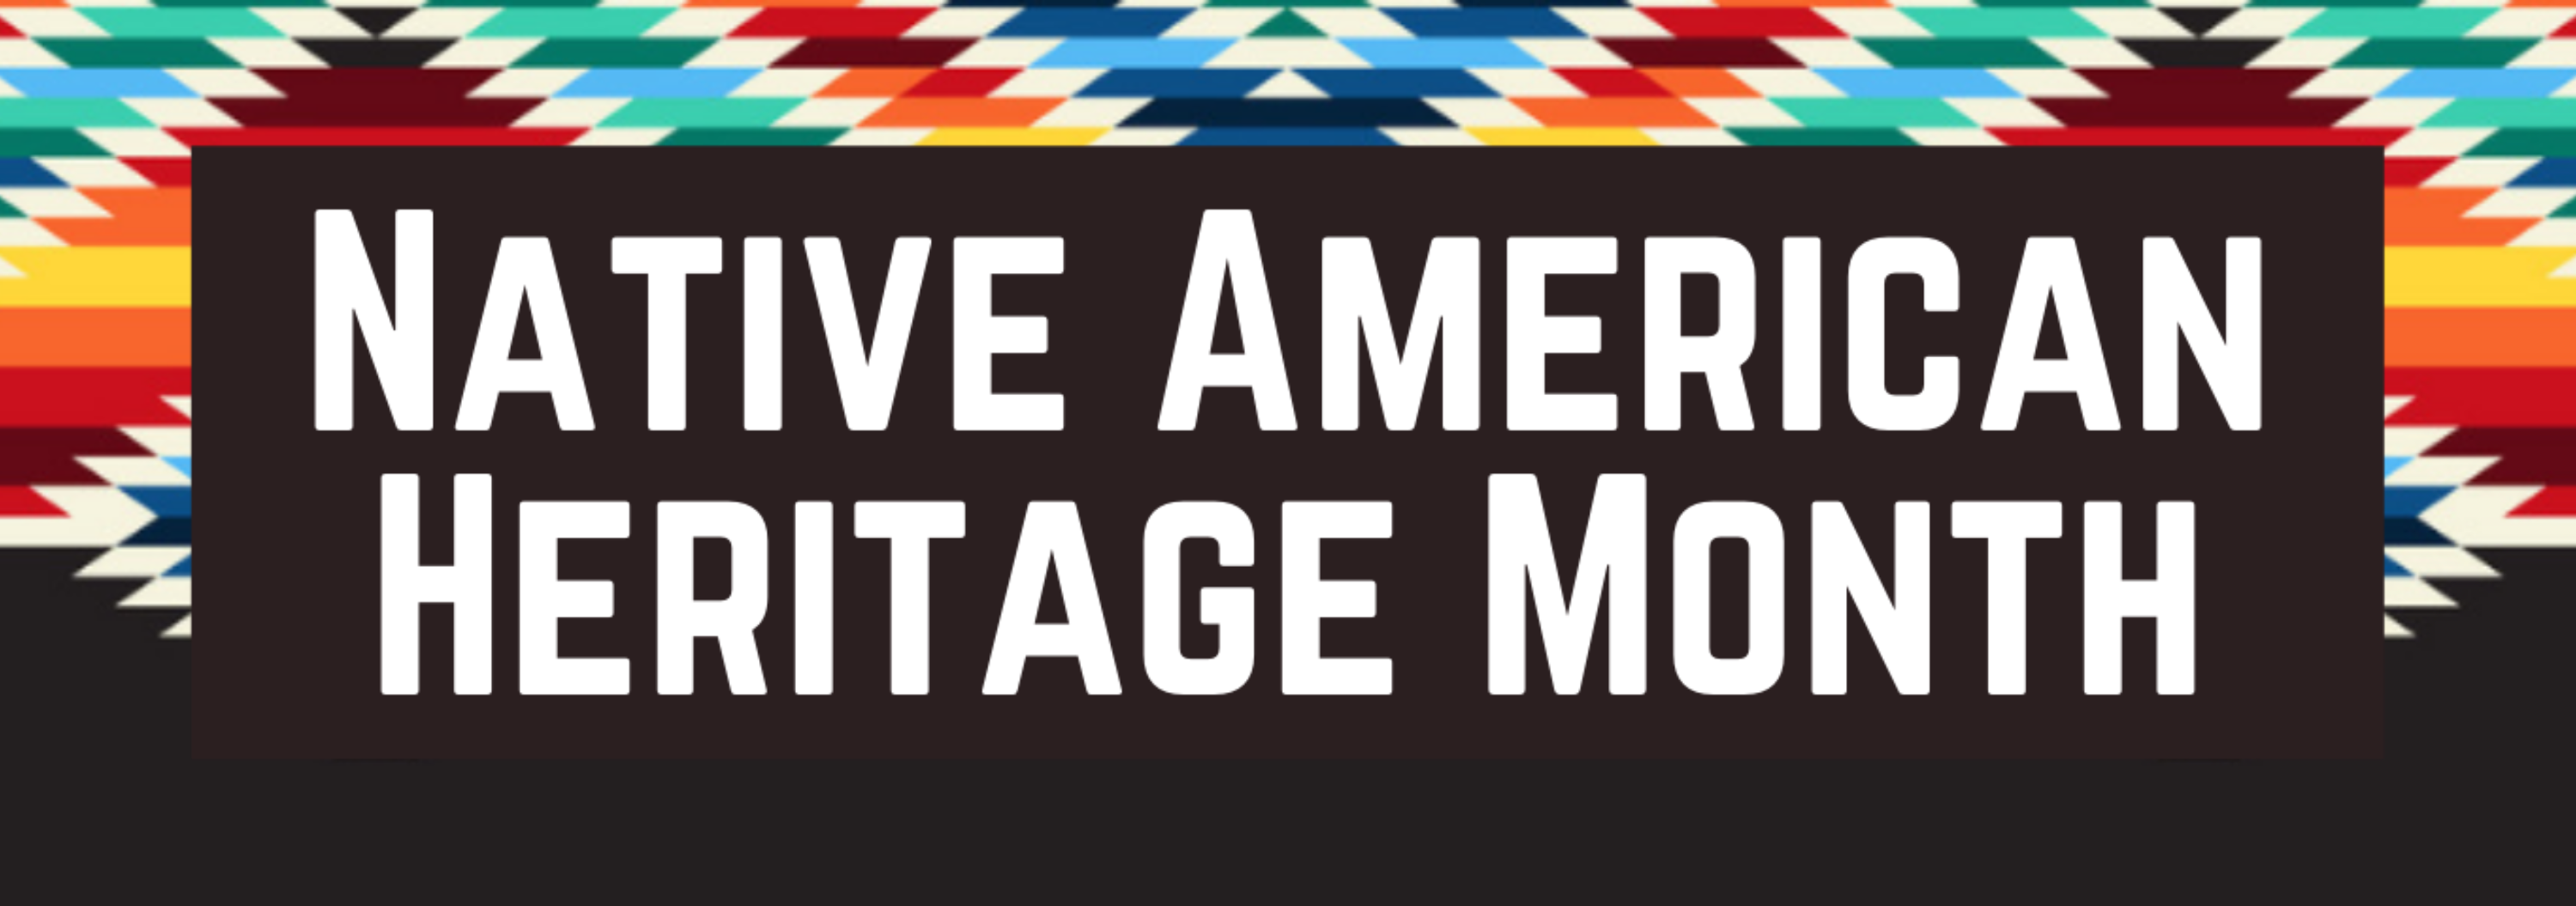 Link to Native American Heritage Month Subject Guide